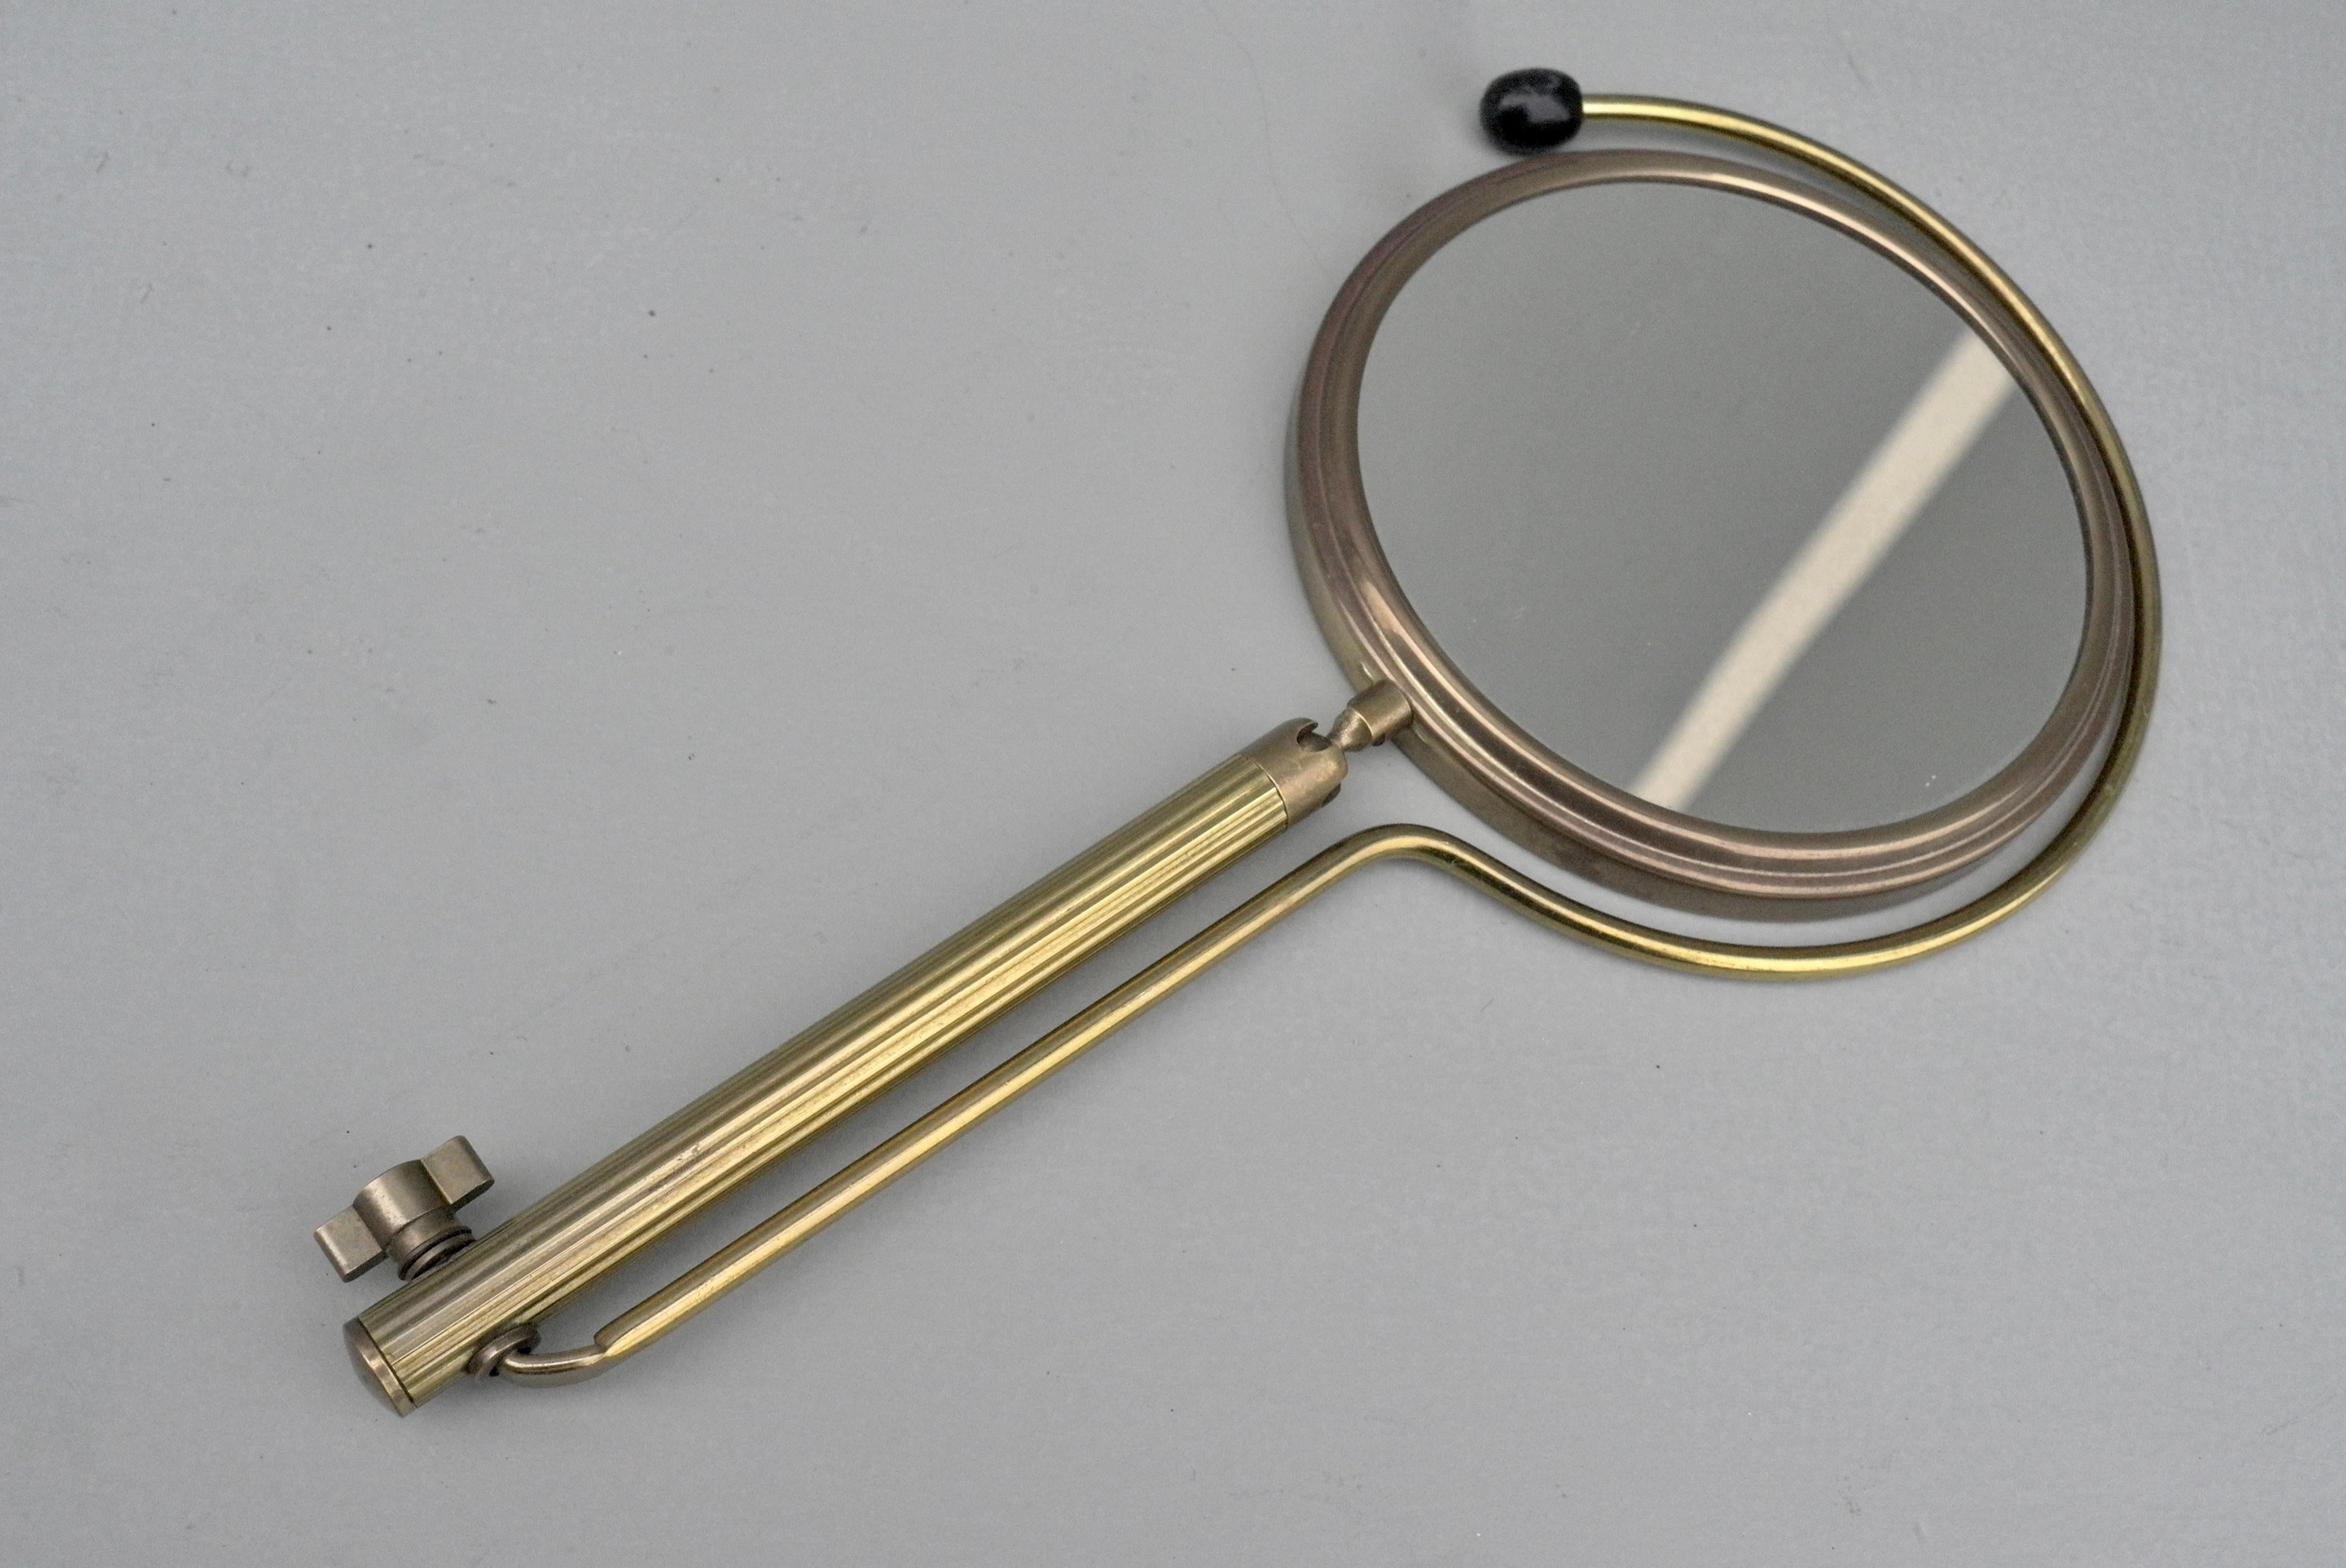 Brass table make up vanity mirror, France 1950s. You can put it on a table, vanity or wall and you can hang it around your neck to do your make up. The mirror has two sides, a magnifier on one side and normal on the other.